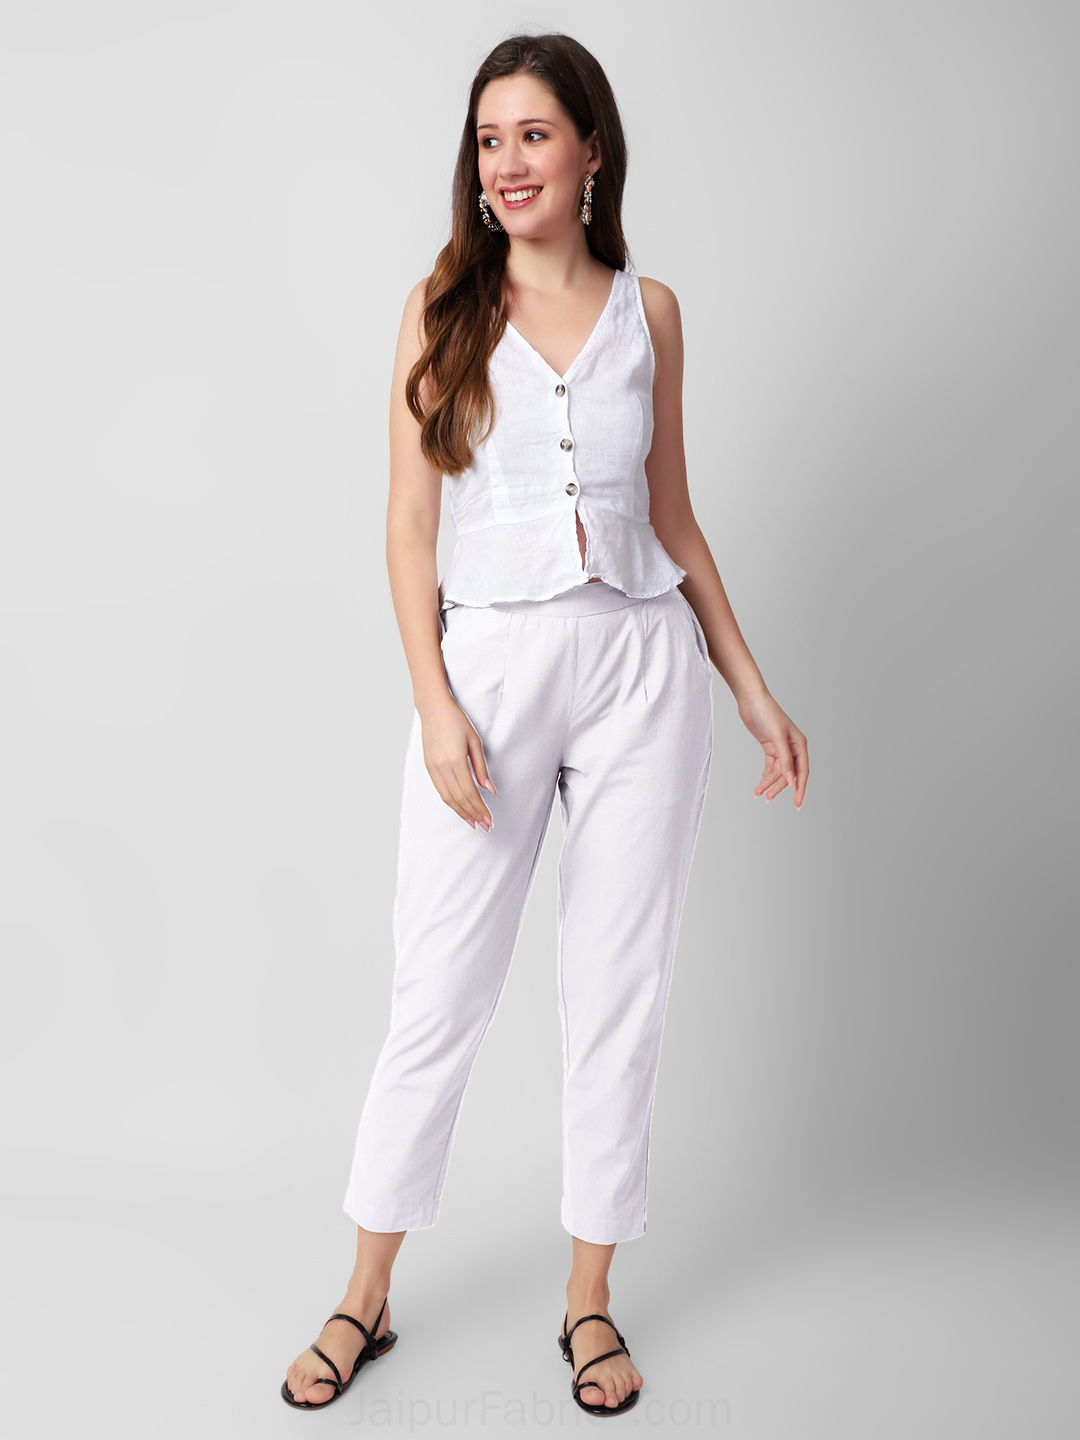 Buy pdpm Cambric Cotton White semi Formal Pants/Casual Trousers at Amazon.in